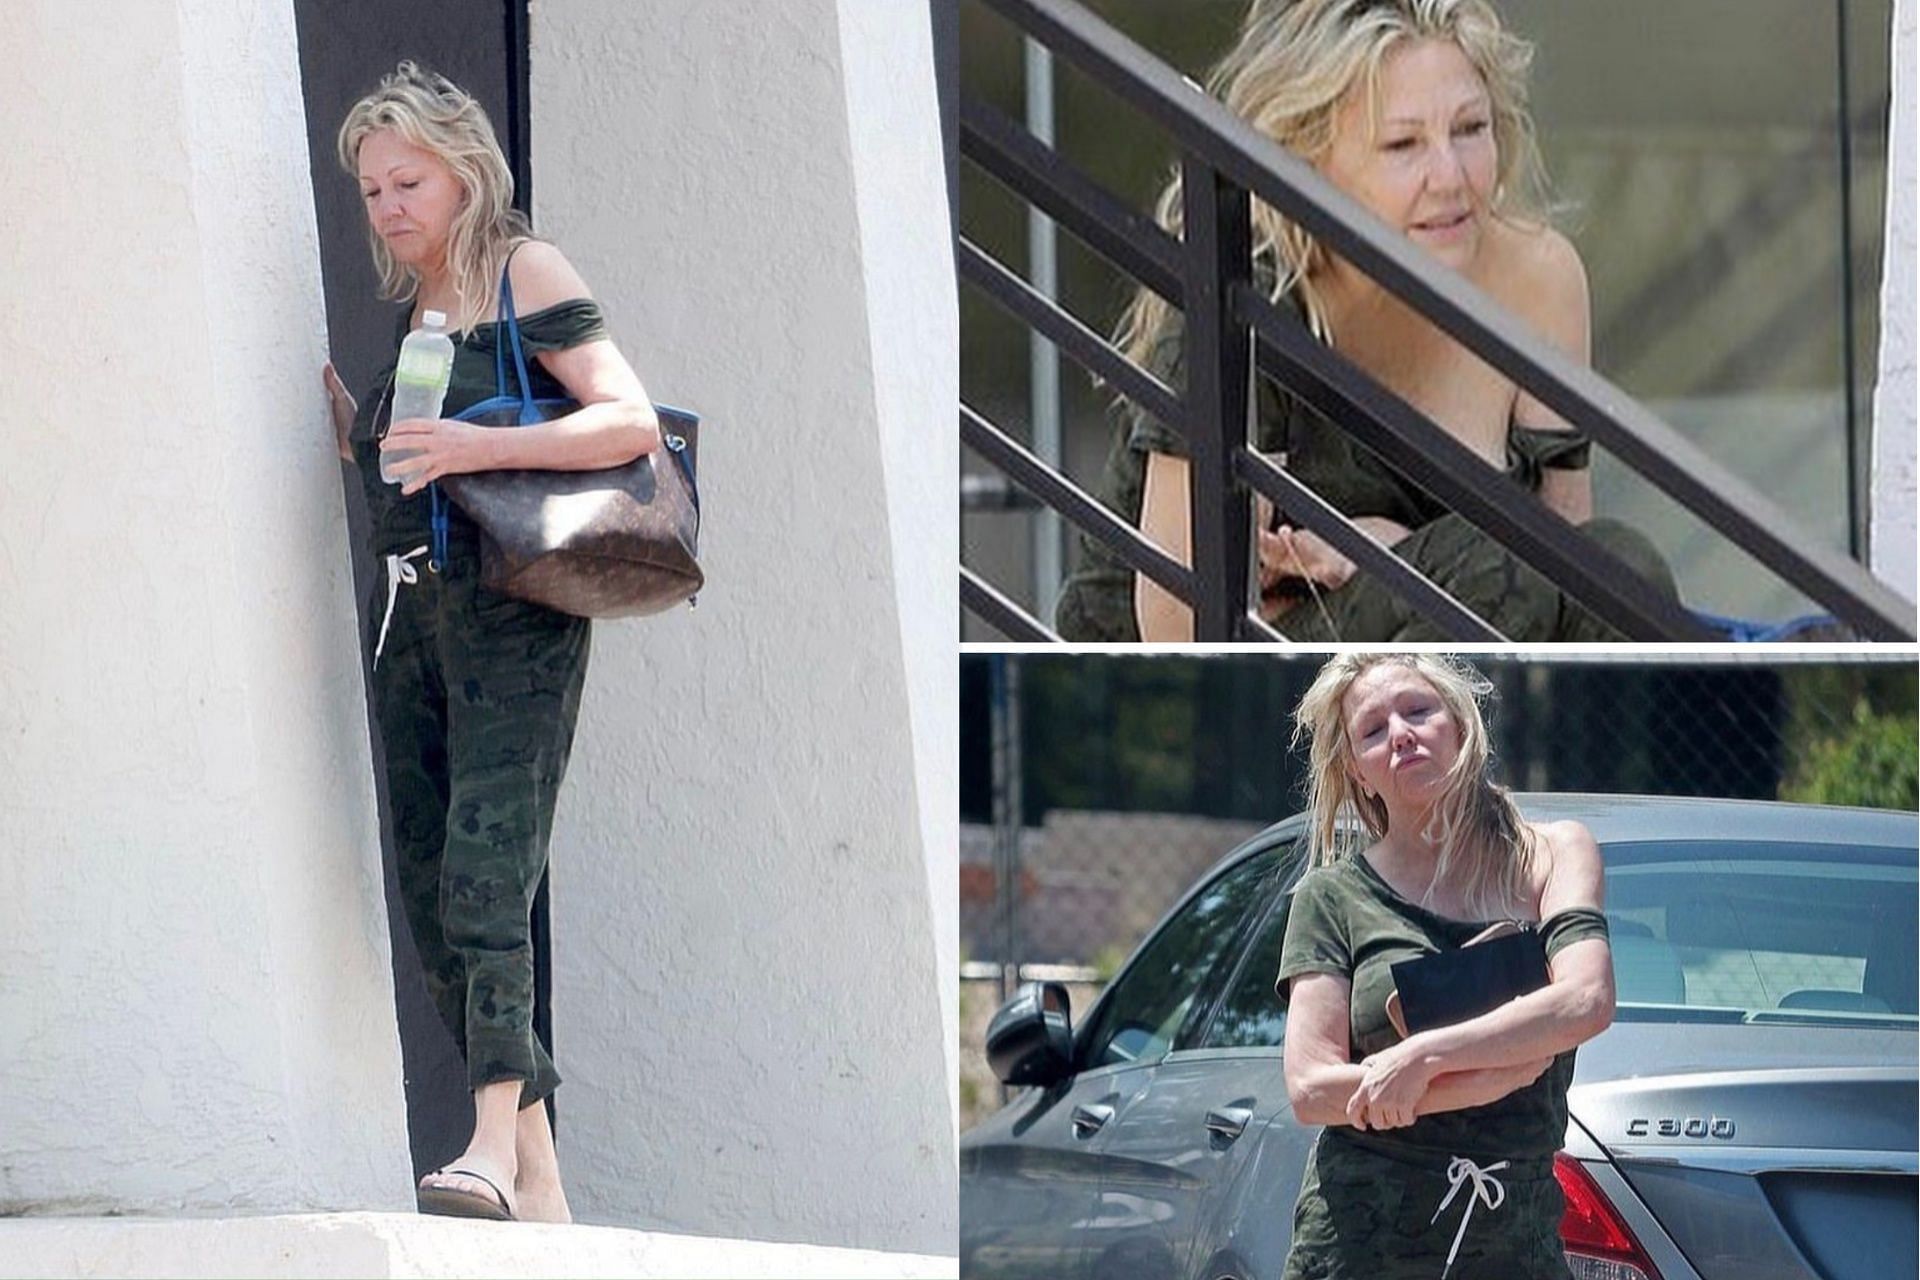 Heather Locklear&#039;s distressing pictures. (Photo via Instagram/the_webnews)